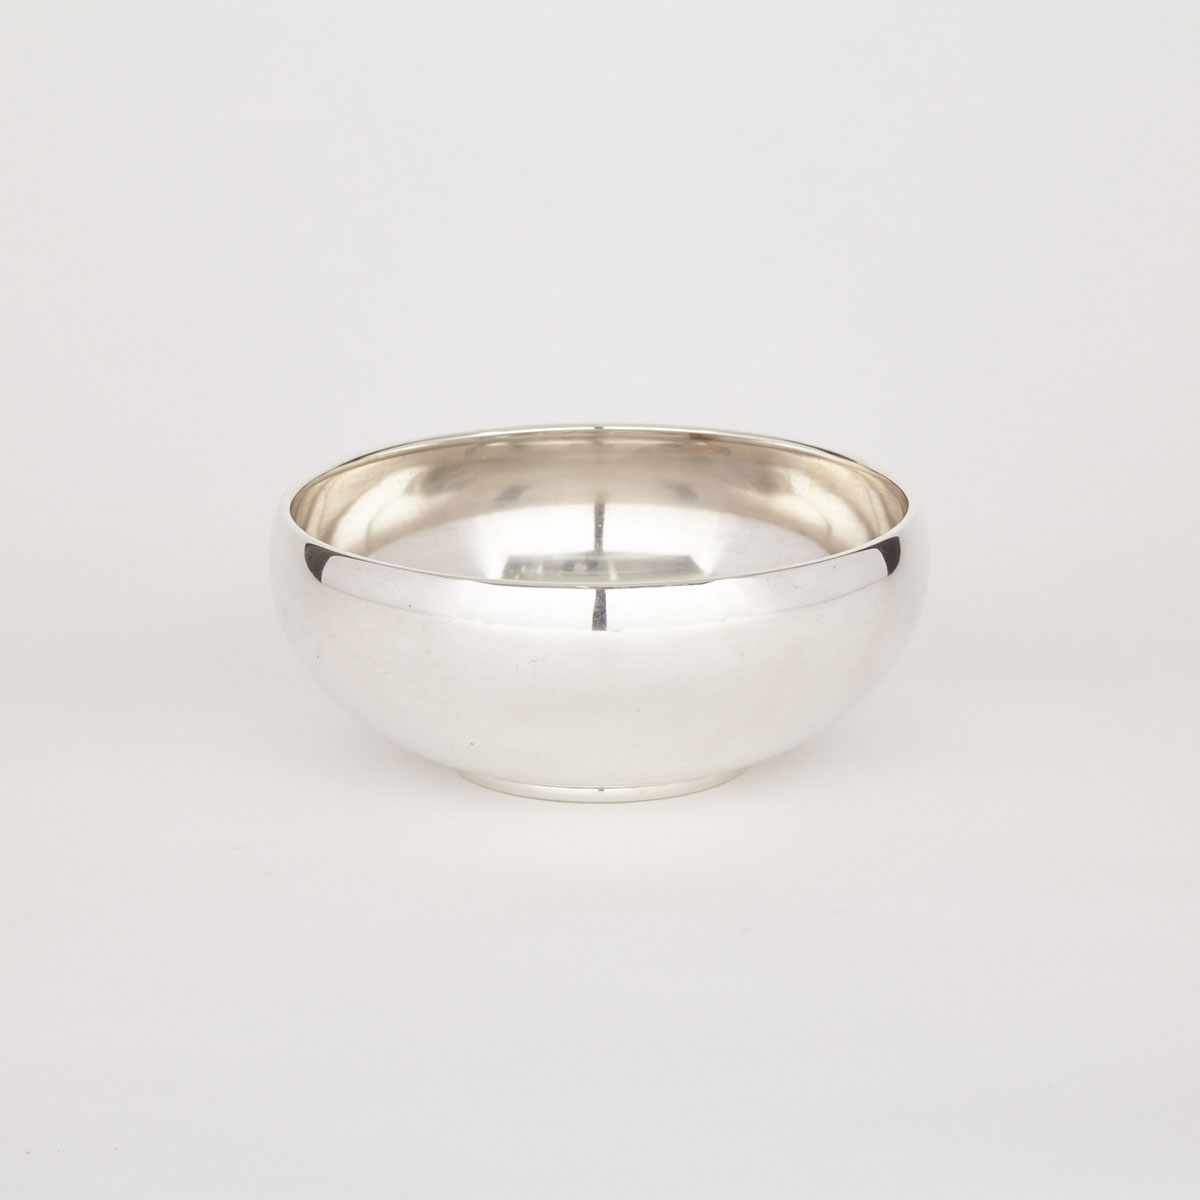 Canadian Silver Bowl, Henry Birks & Sons, Montreal, Que., 1941